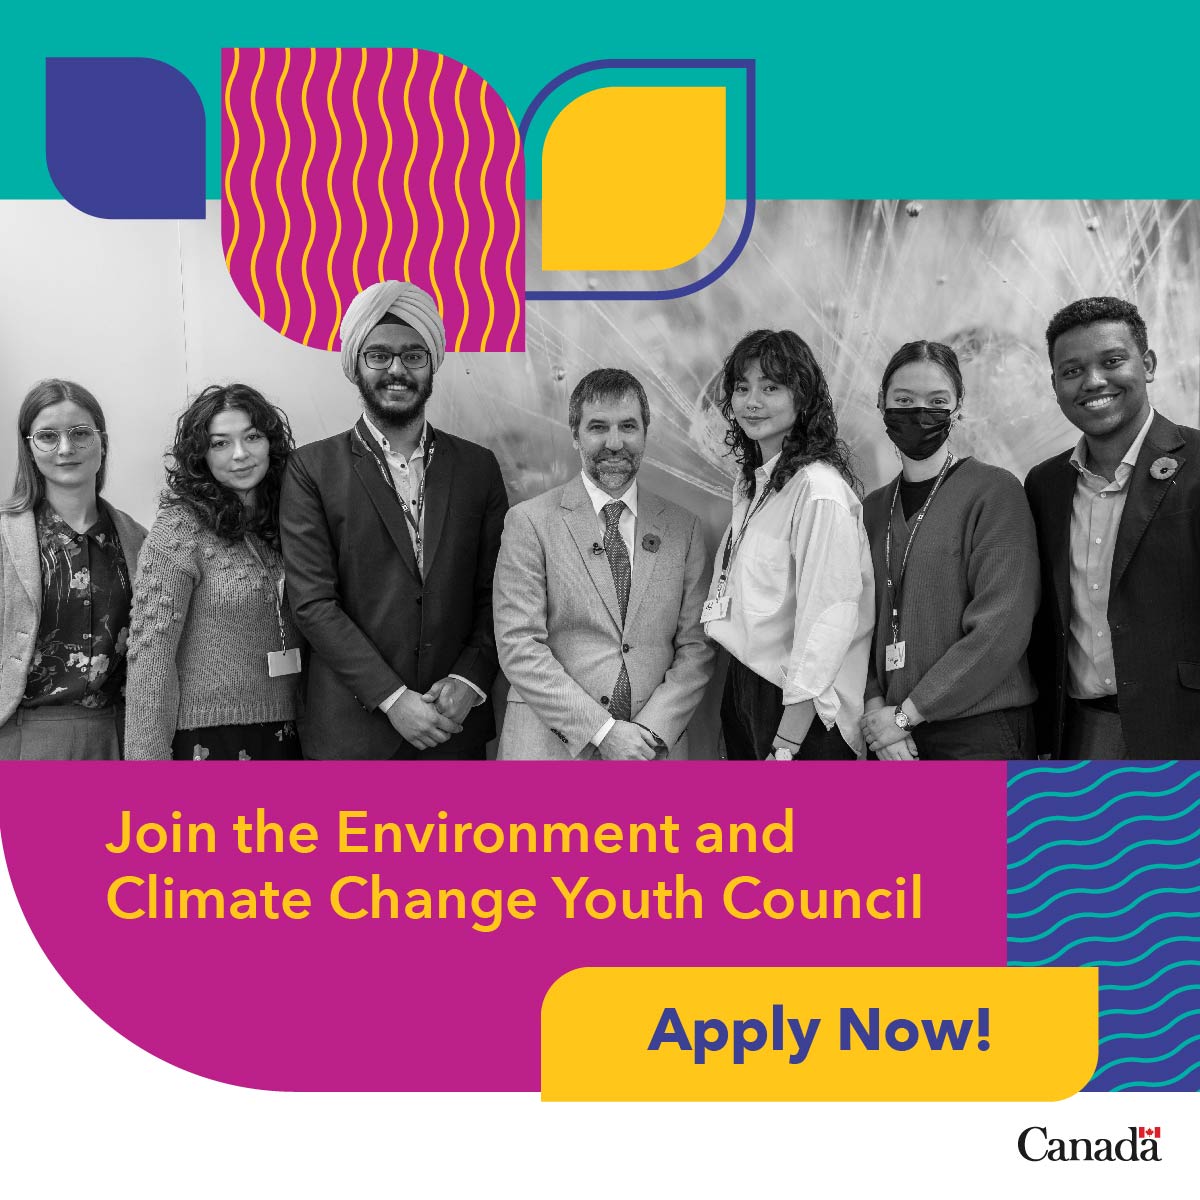 We need #youth perspectives to develop inclusive environmental and climate policies. Apply to join the Environment and #ClimateChange Youth Council. Get involved: ow.ly/kzWR50R1f84 @cjECCyc